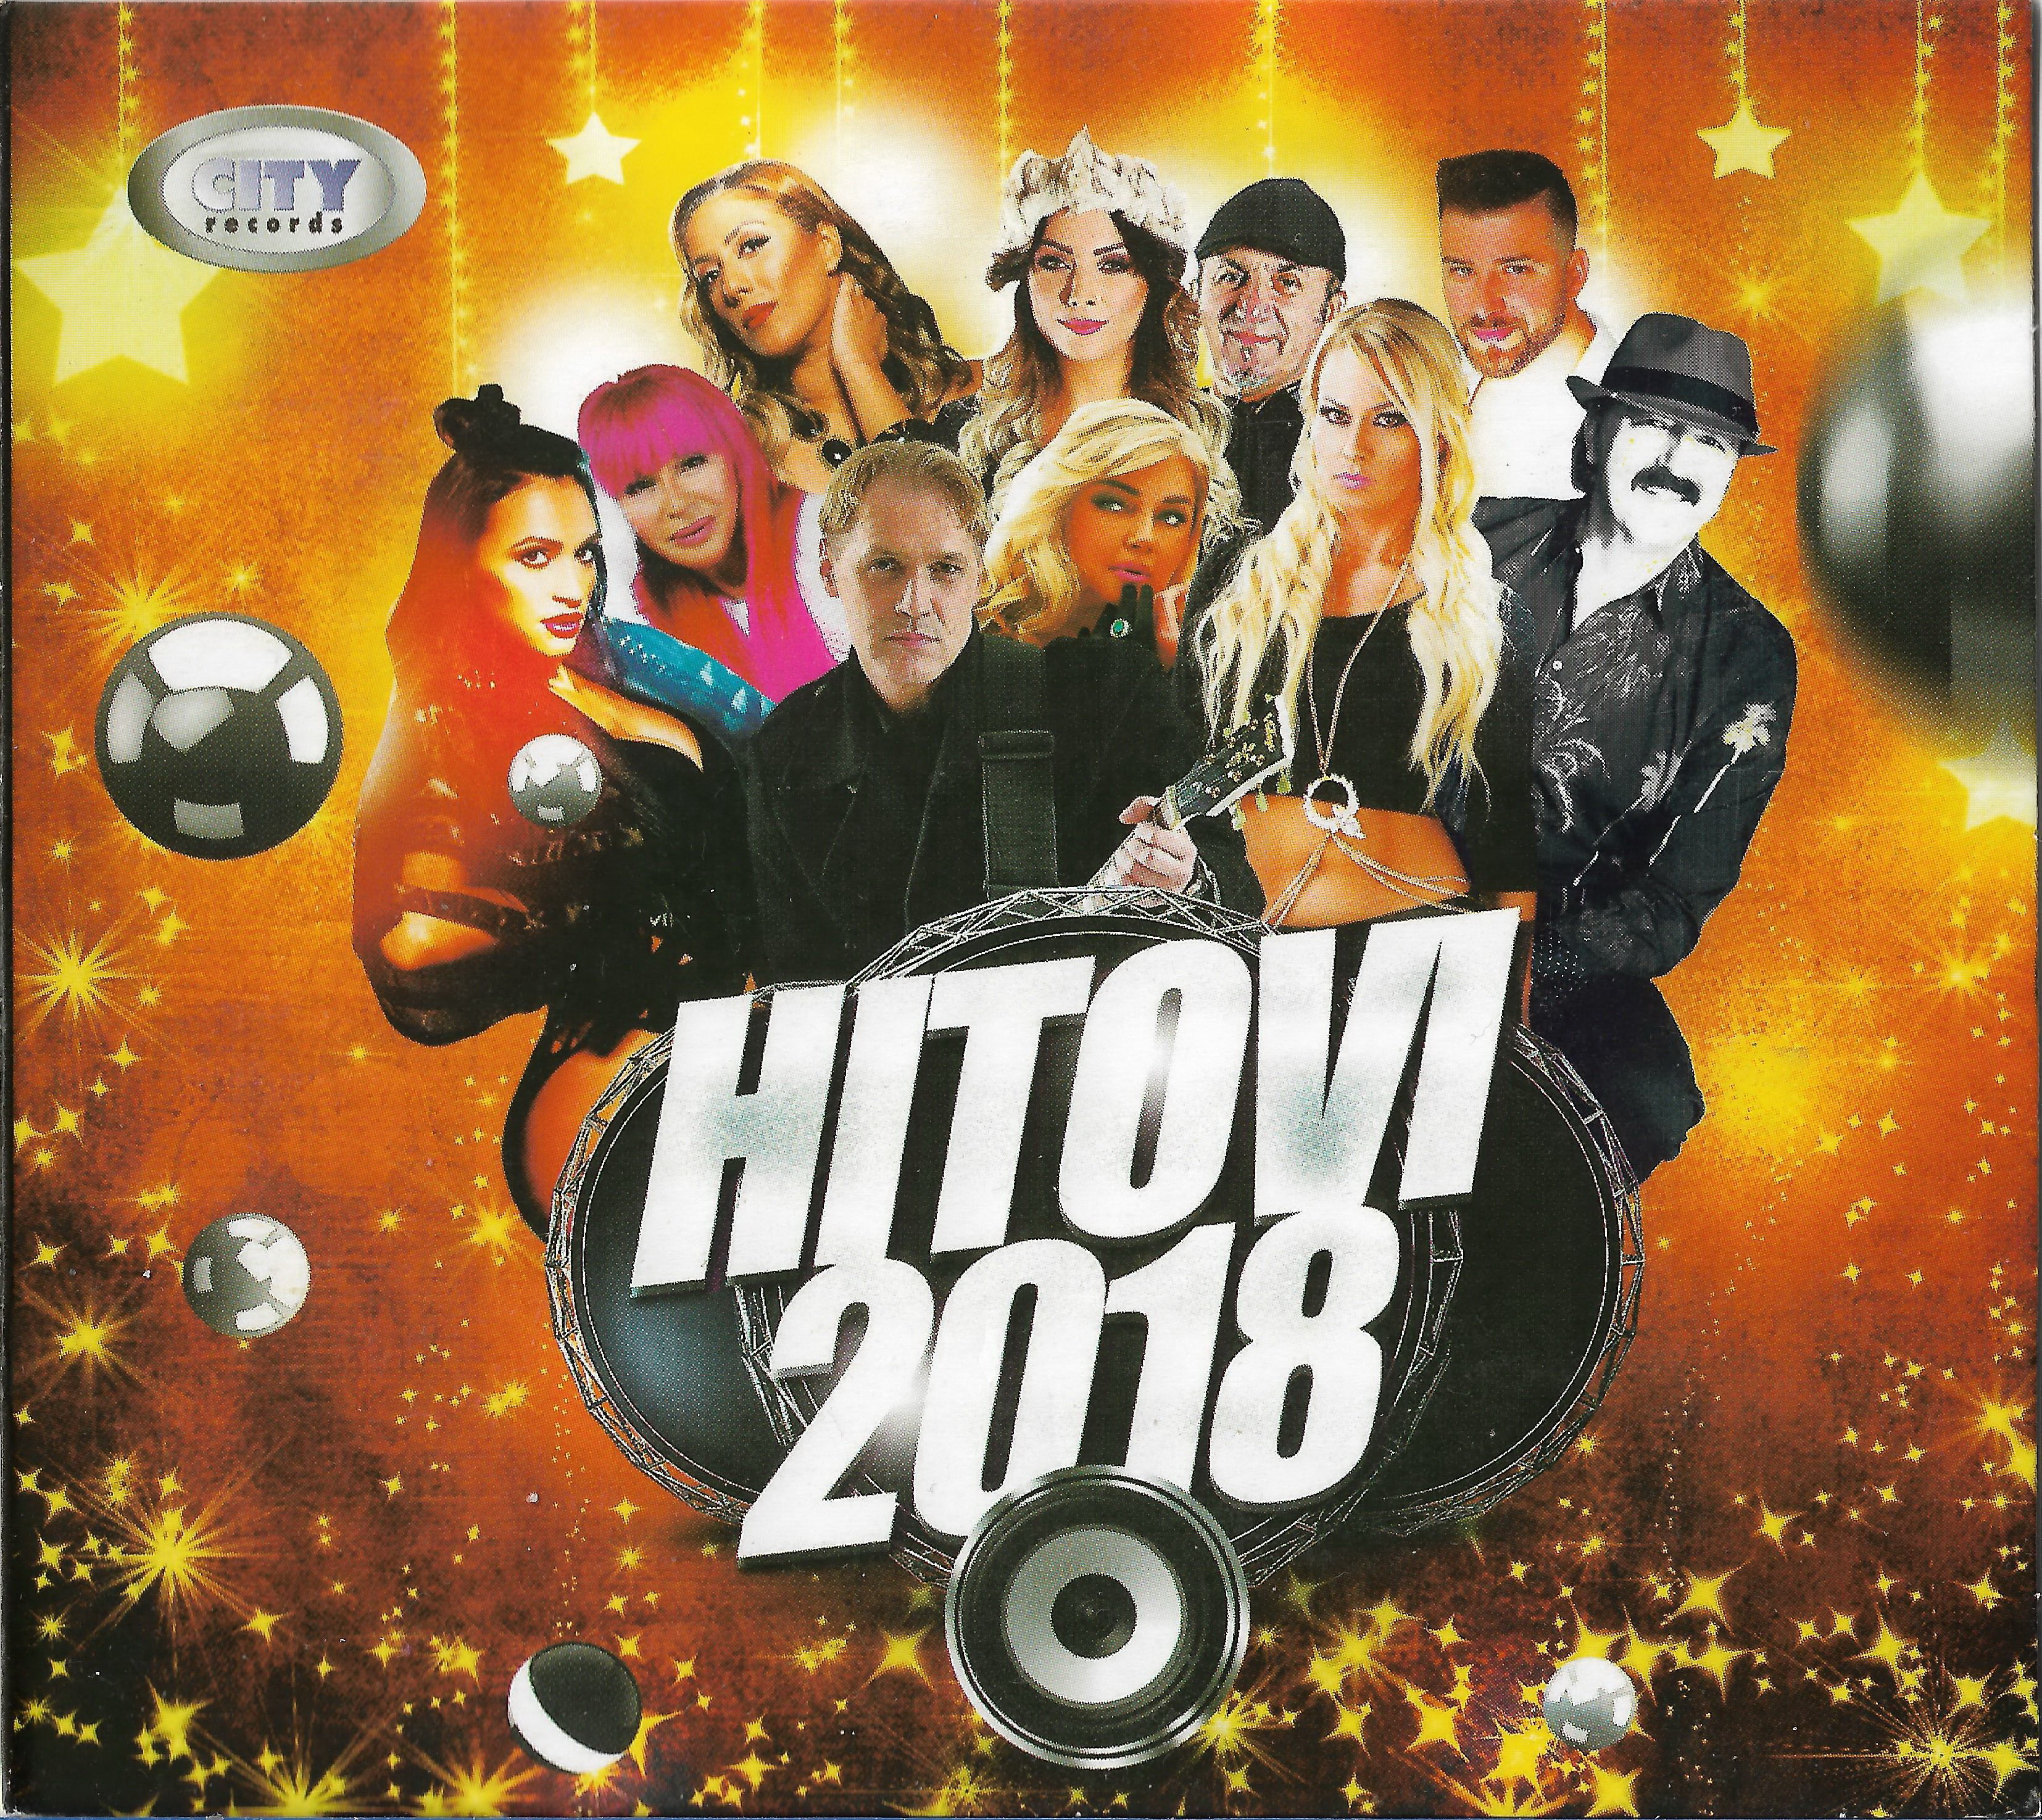 The Best Of Hitovi 2018 1 a